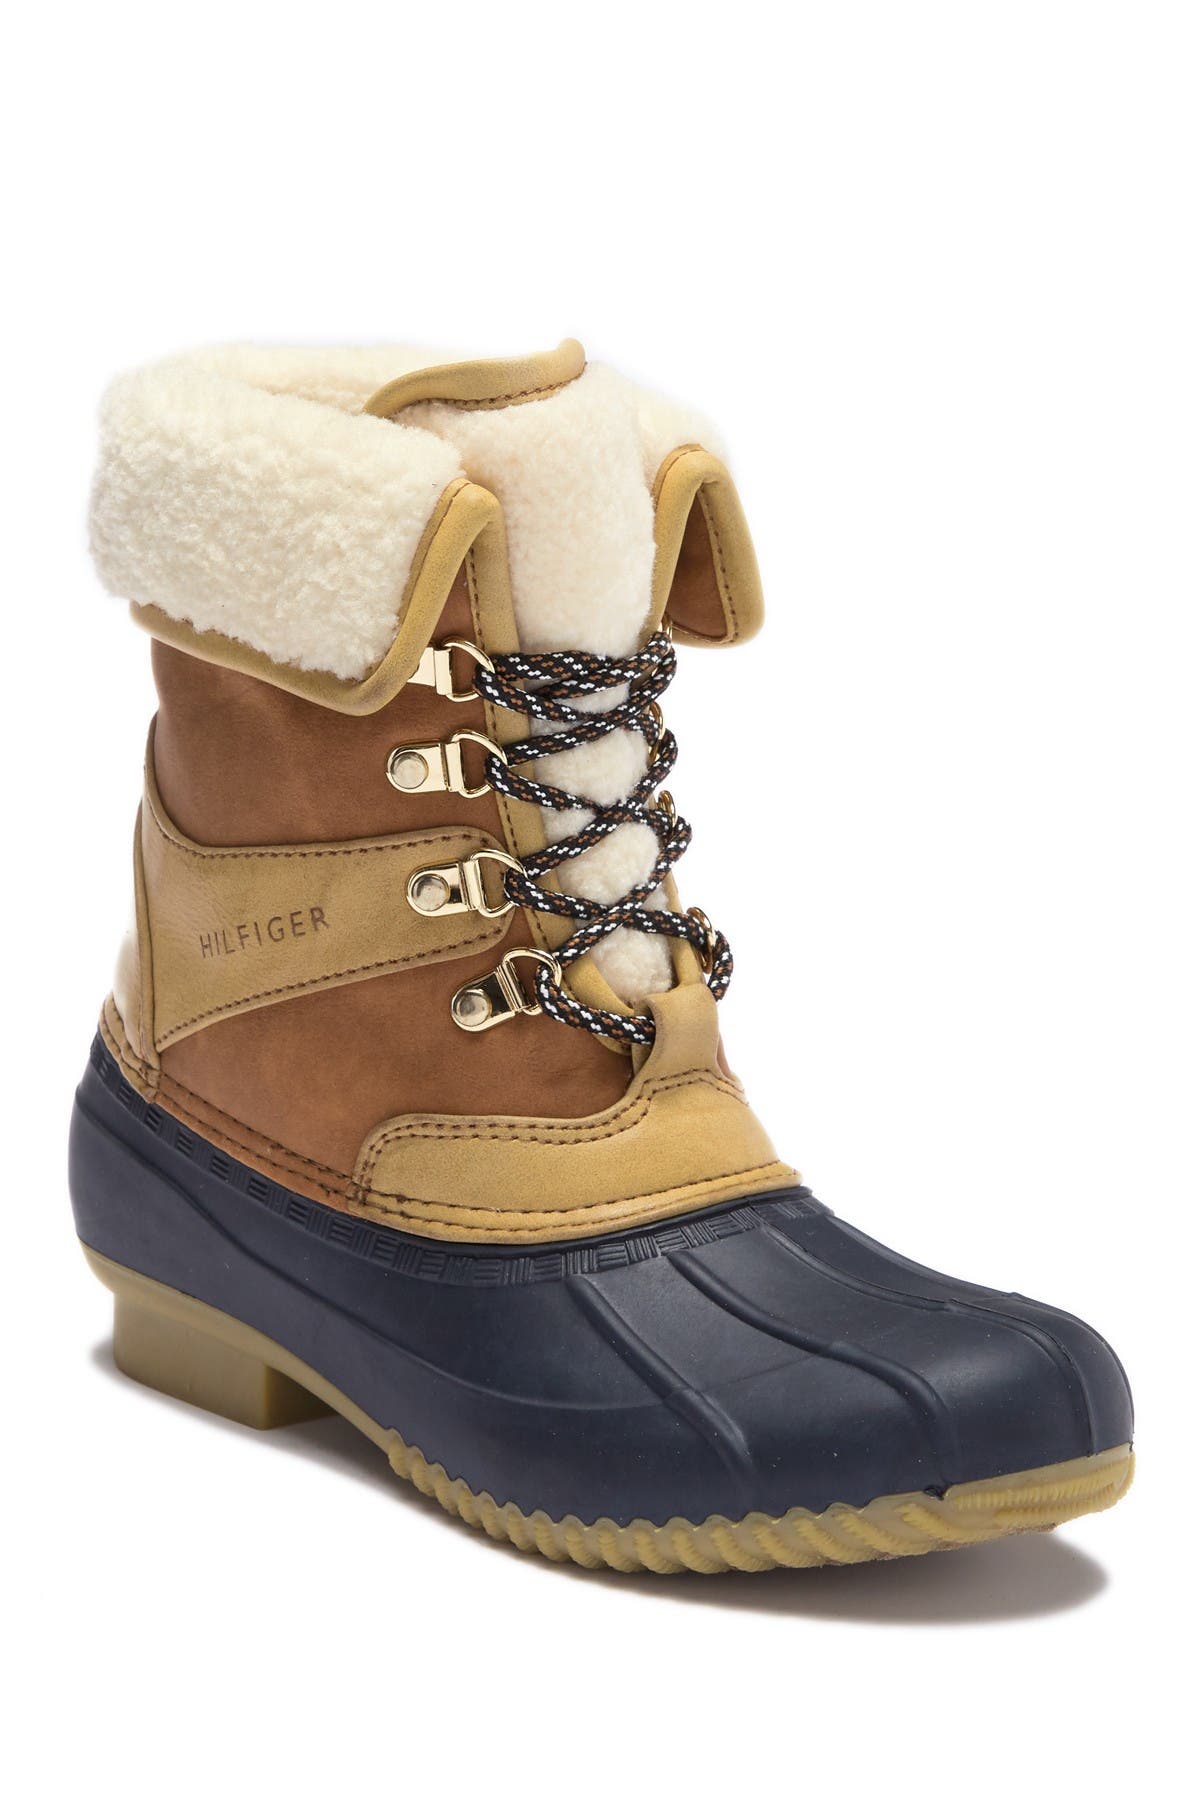 Rusteen Faux Shearling Lined Duck Boot 